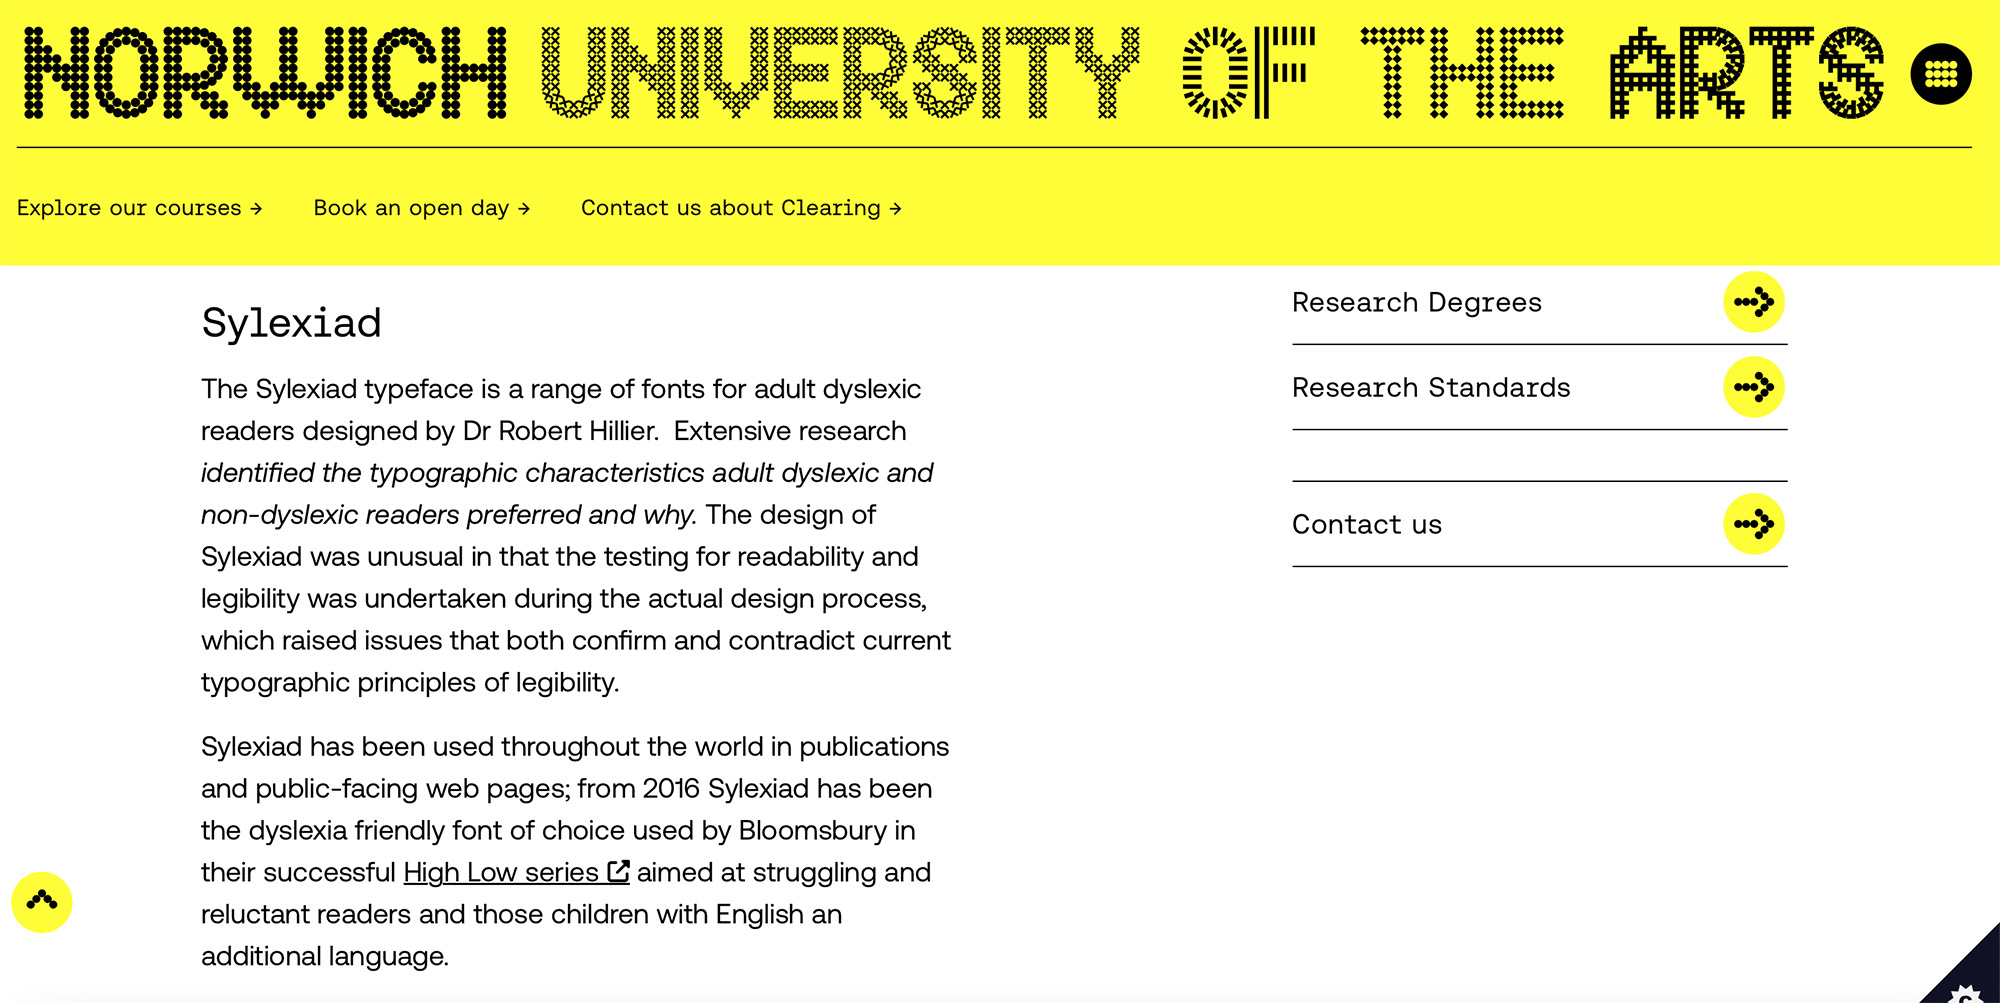 Norwich University of the Arts webpage screengrab, shows a bright yellow banner with the University logo, with standard body text article below in a black typeface